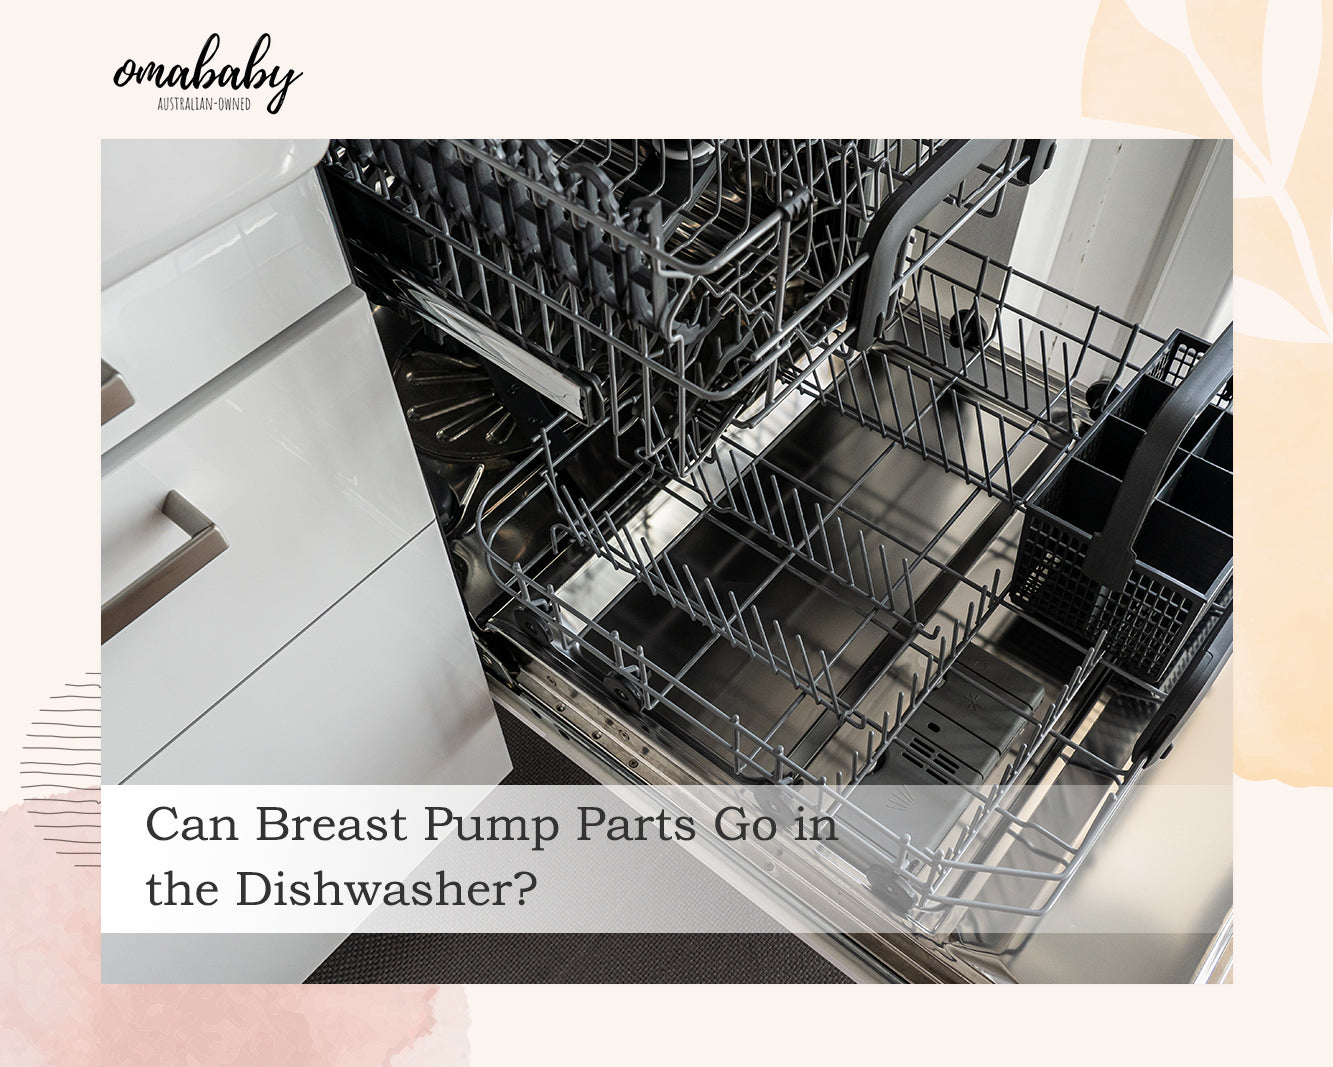 How to Wash Breast Pump Parts In the Dishwasher